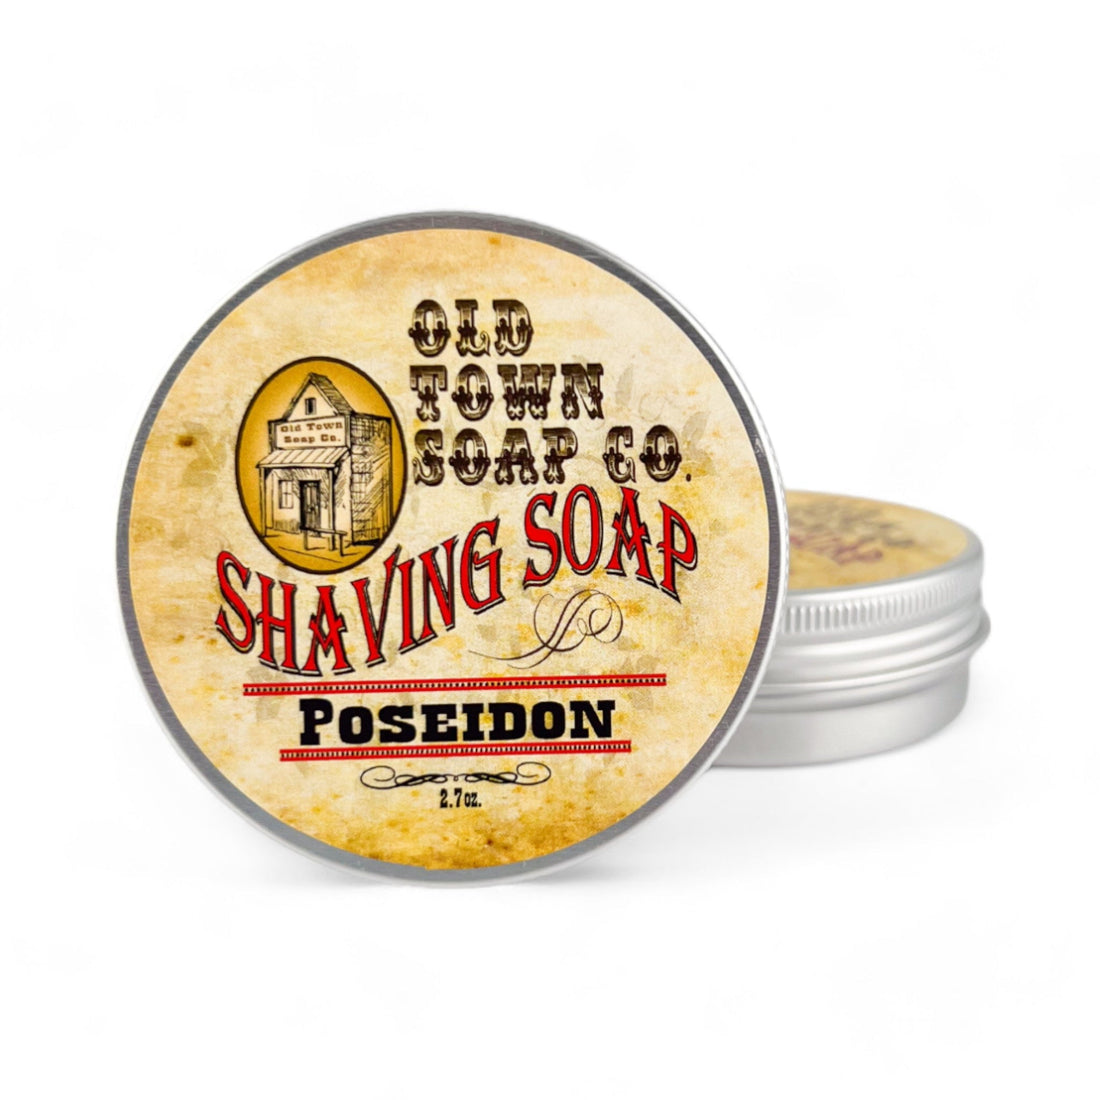 Poseidon -Shave Soap Tin - Old Town Soap Co.